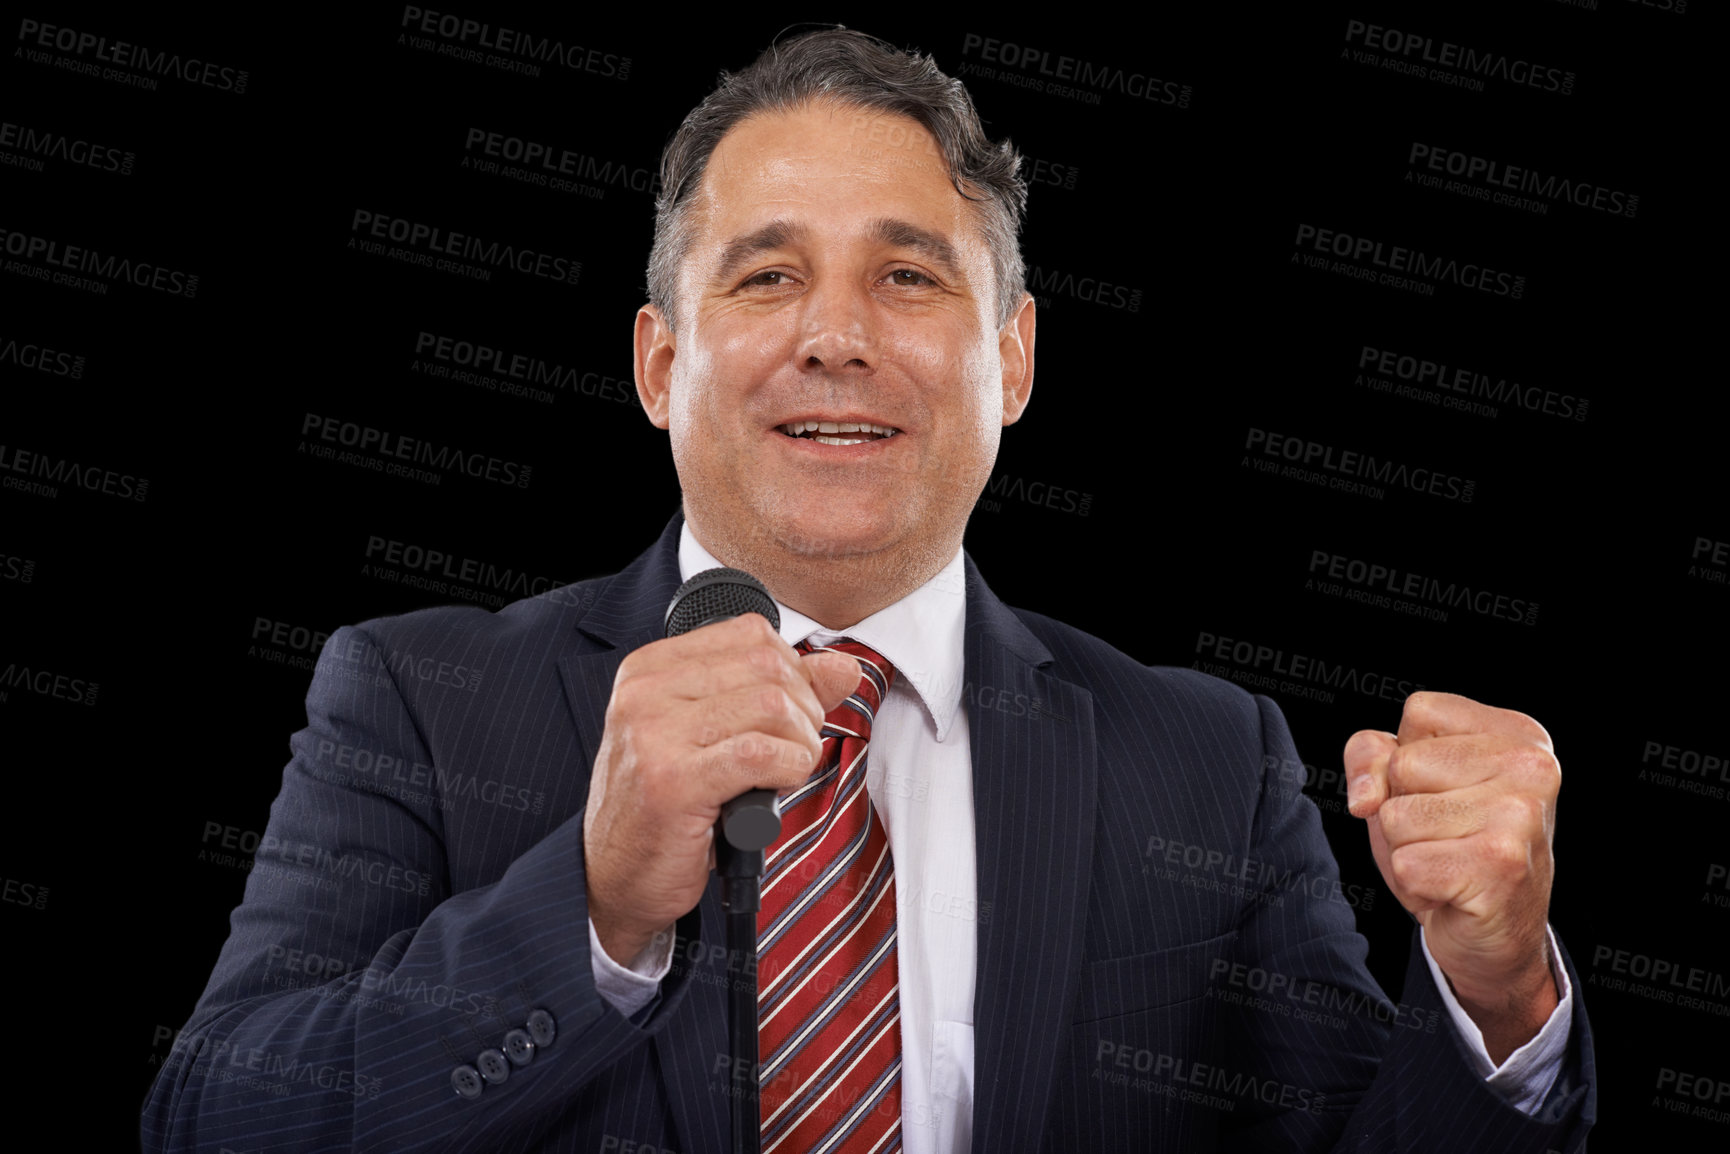 Buy stock photo A man in a suit giving a speech while holding a microphone